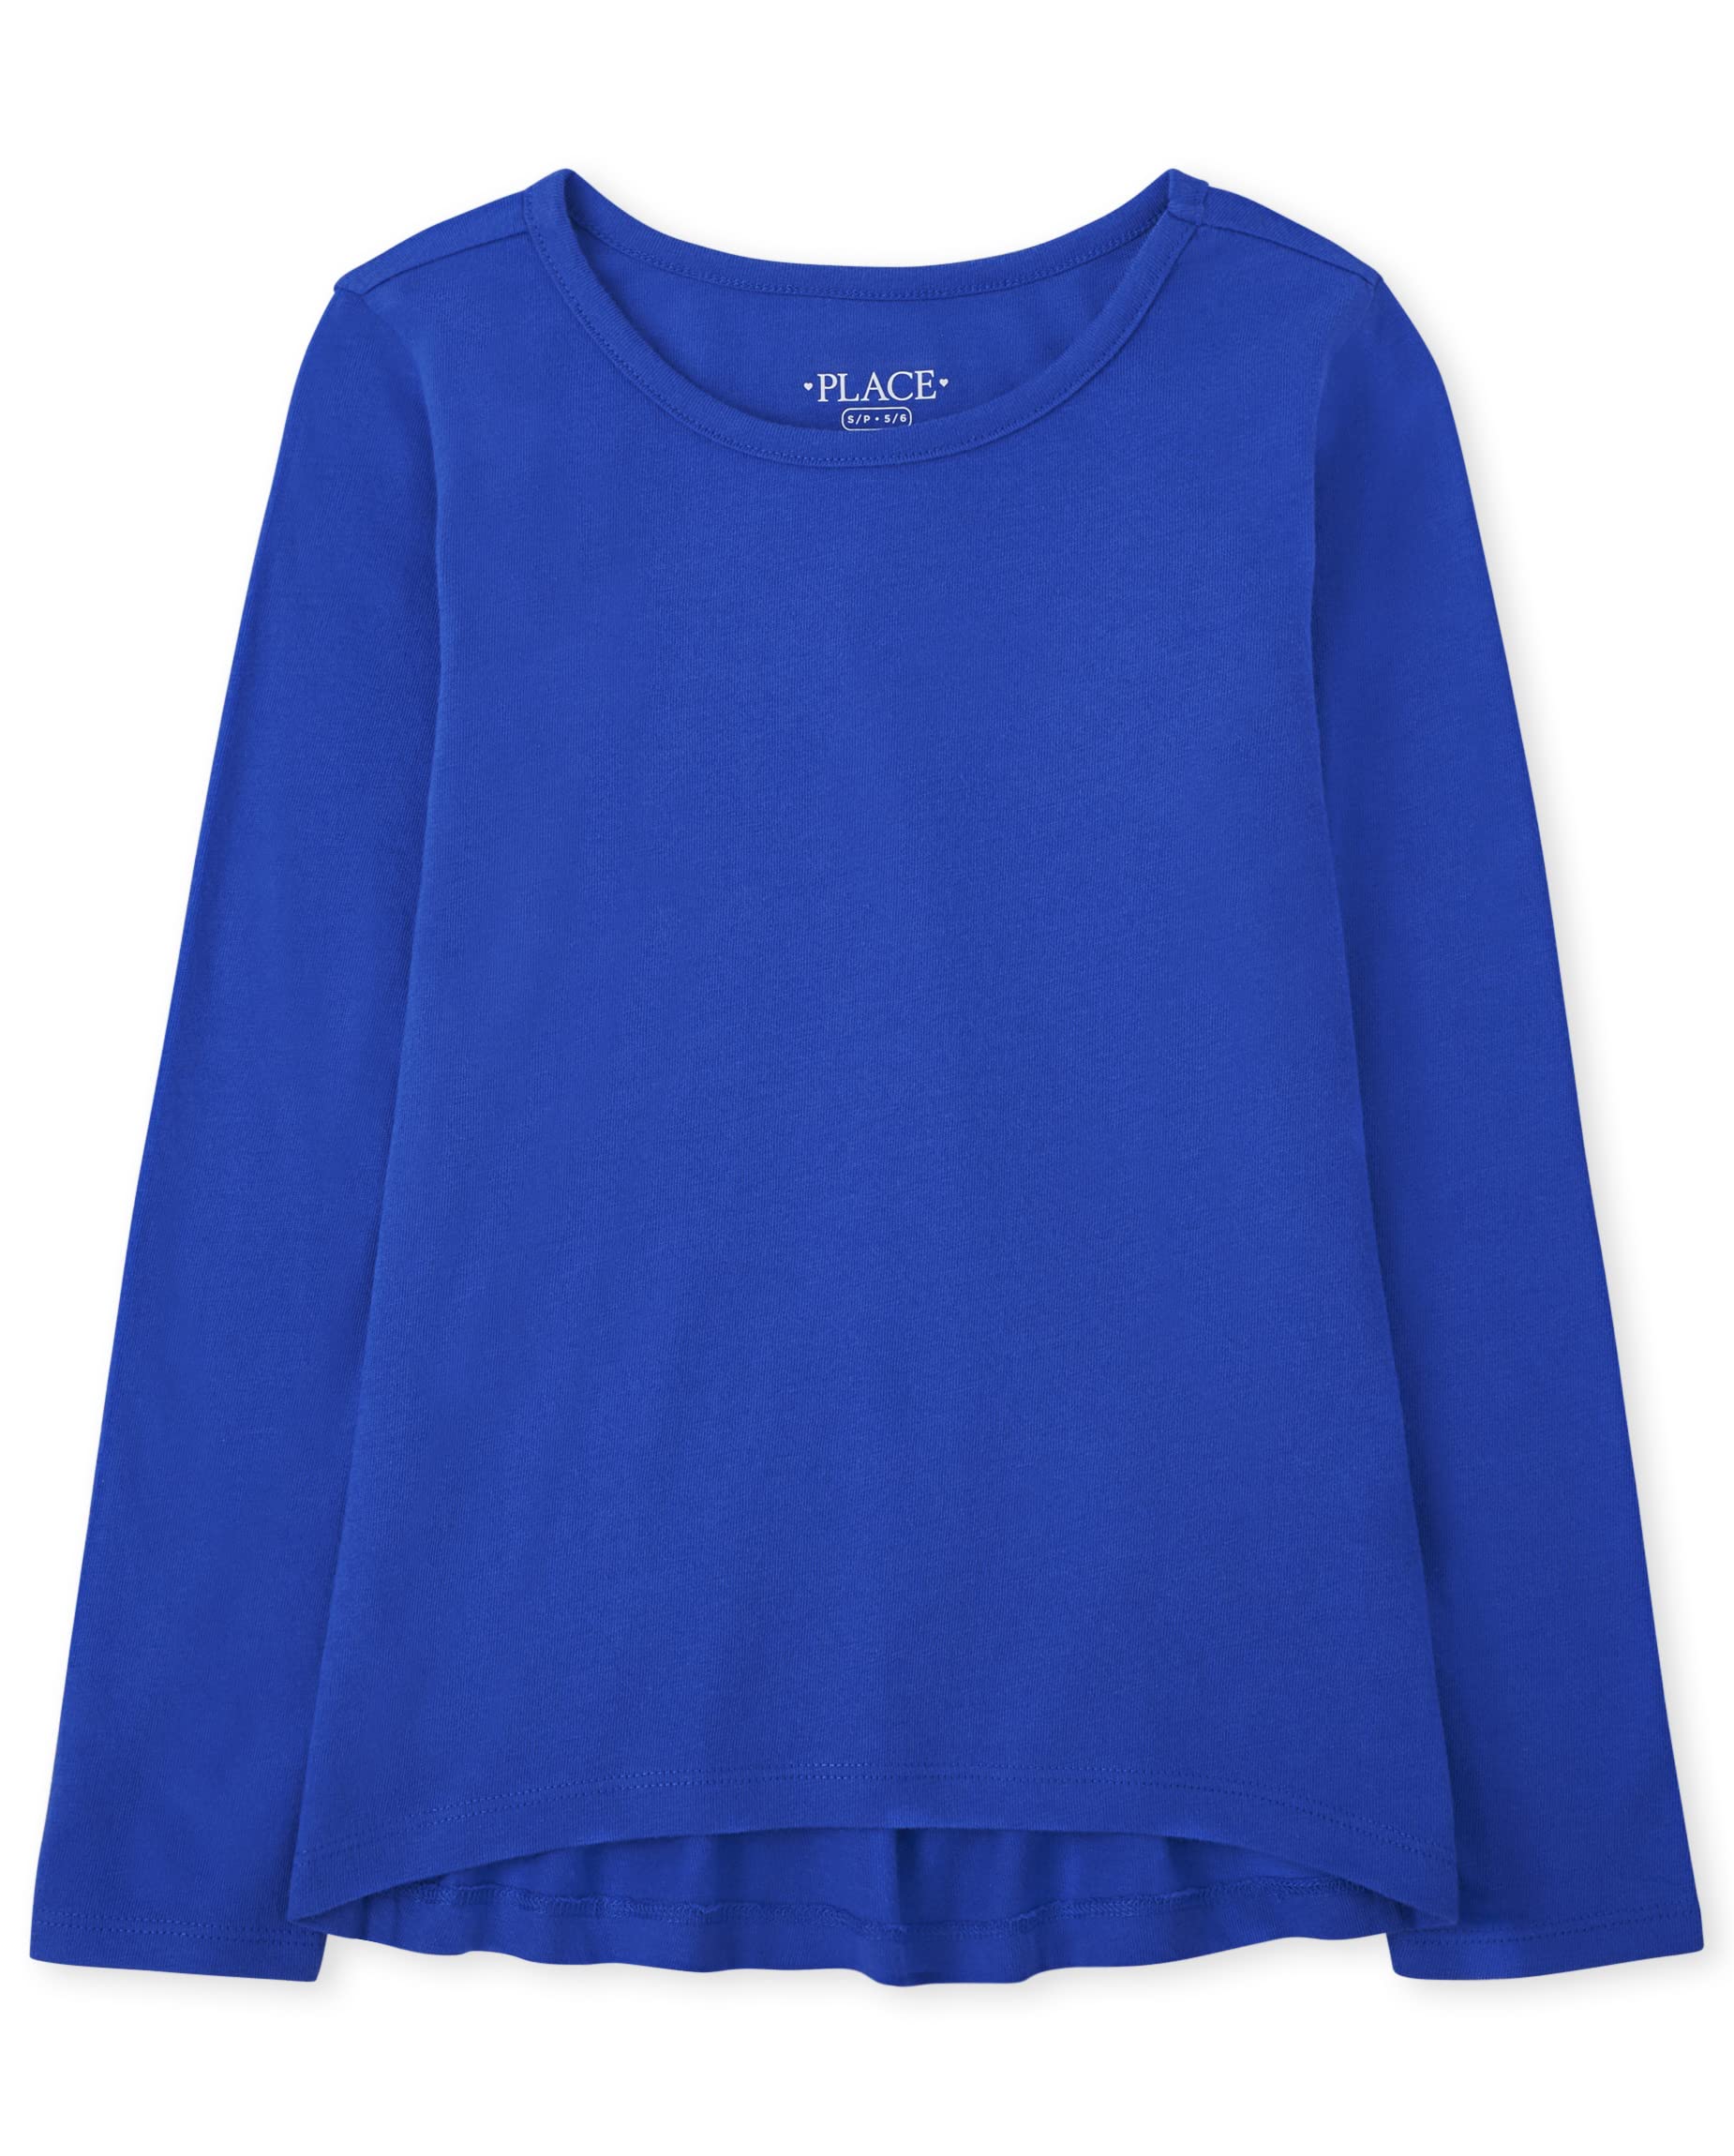 The Children's Place Girls' Long Sleeve High Low Top